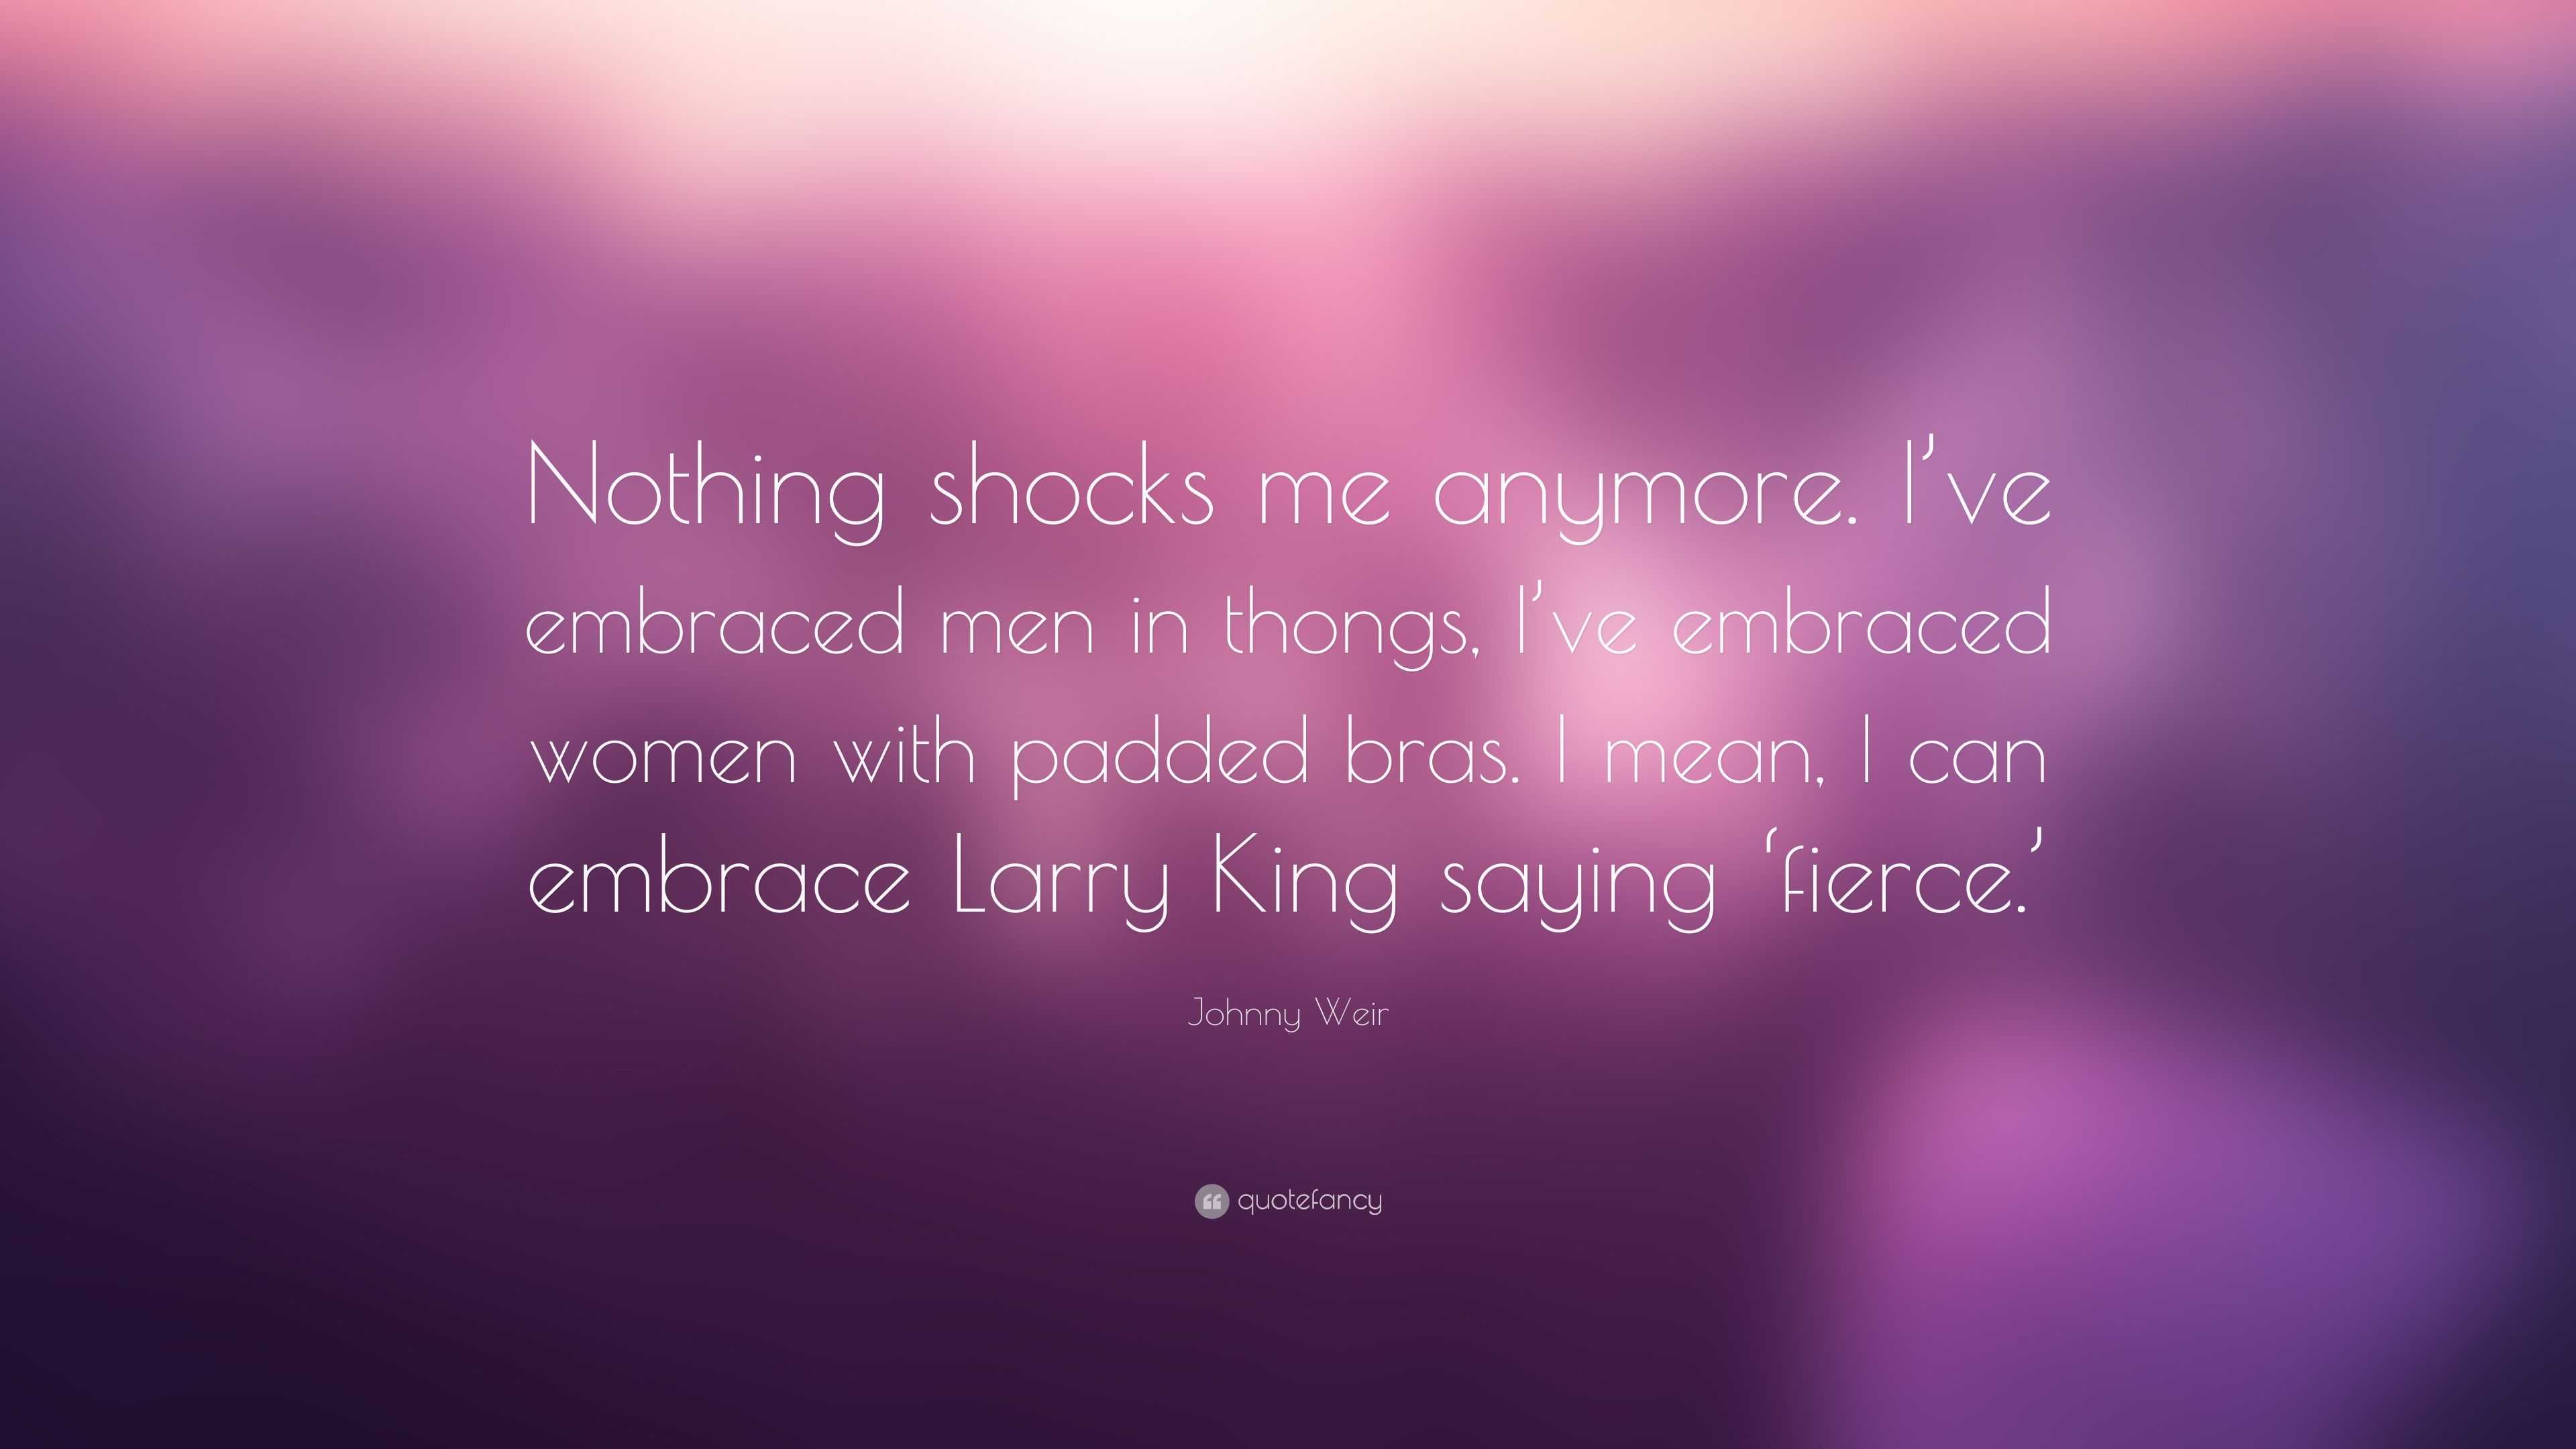 Johnny Weir quote: Nothing shocks me anymore. I've embraced men in thongs,  I've